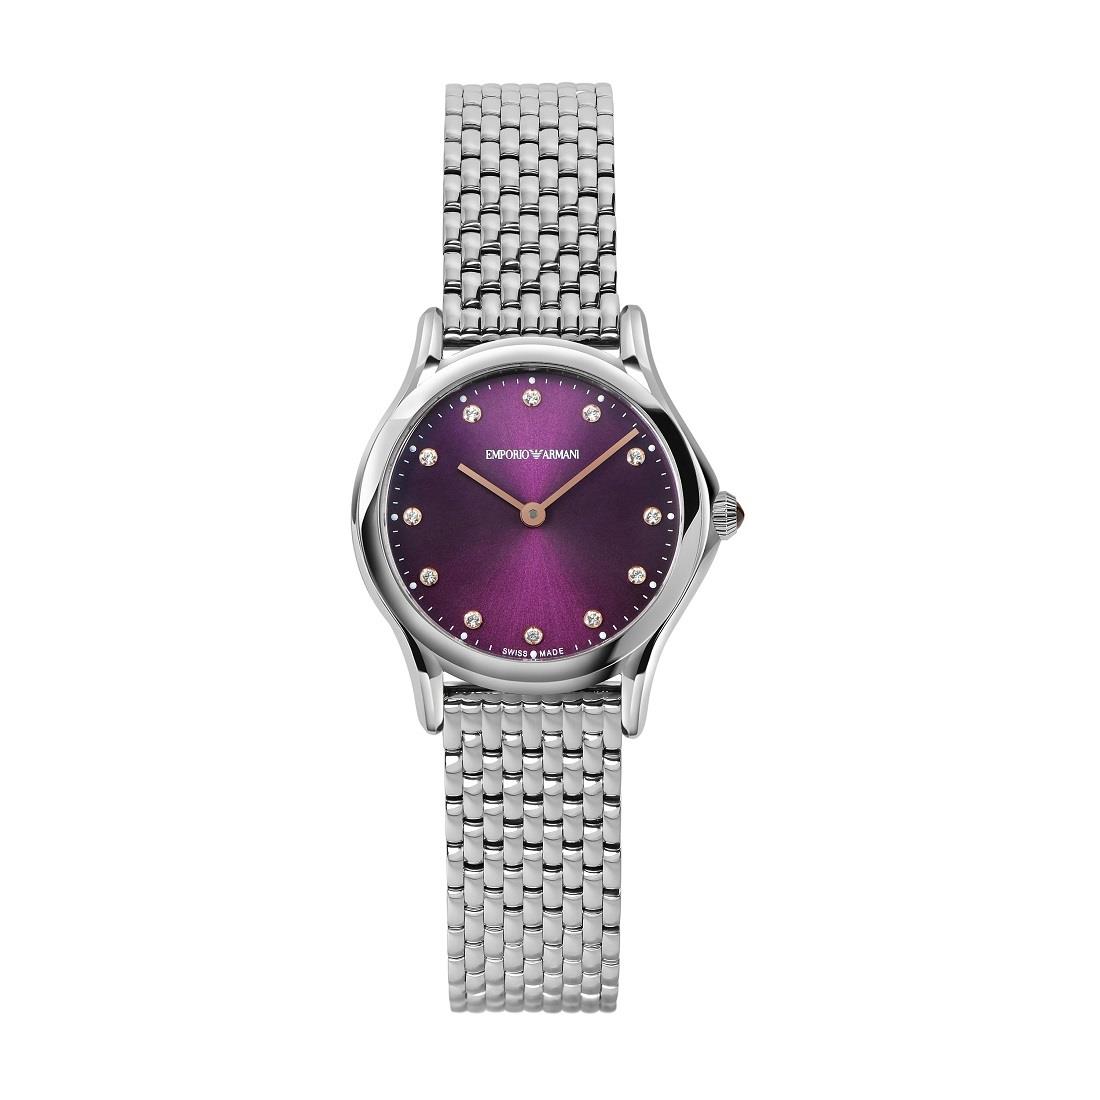 Women's watch with 28mm case - EMPORIO ARMANI